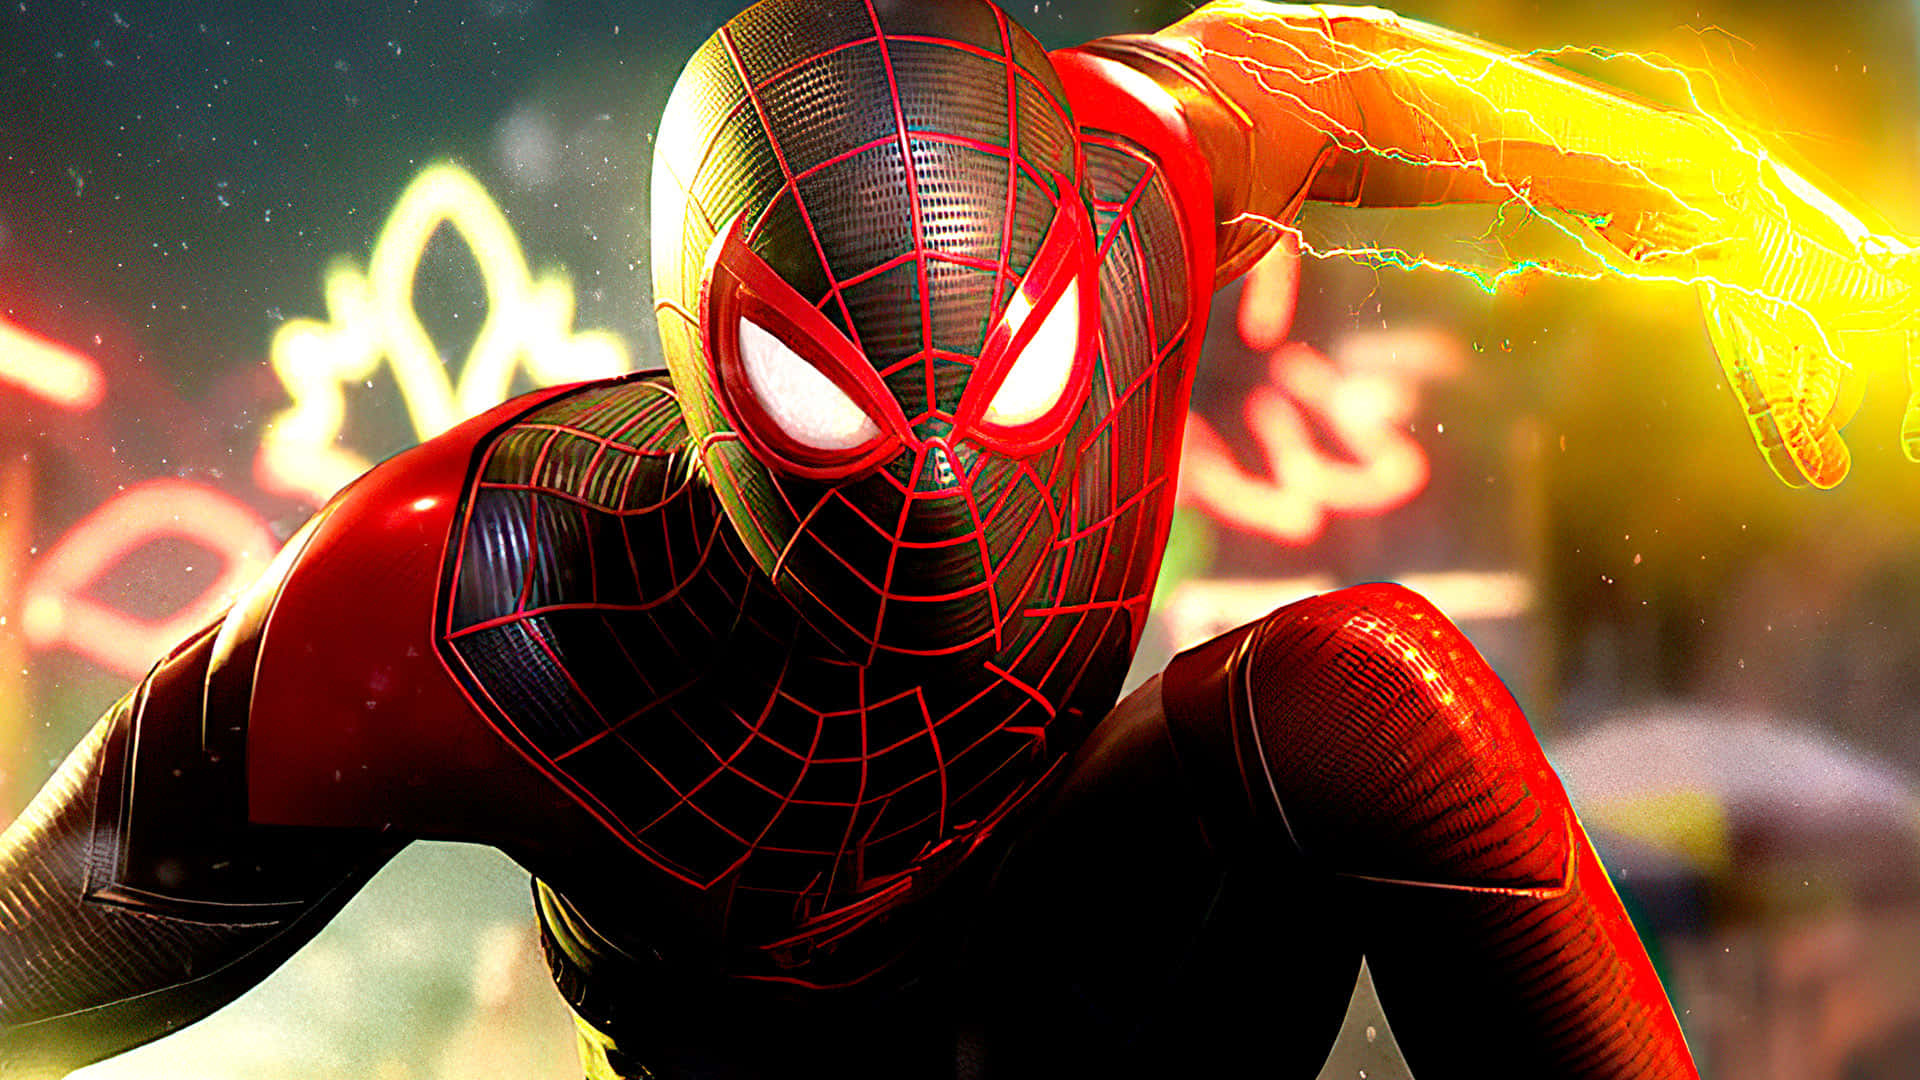 Join Miles Morales as he embarks on a journey as Marvel's Ultimate Spider-Man